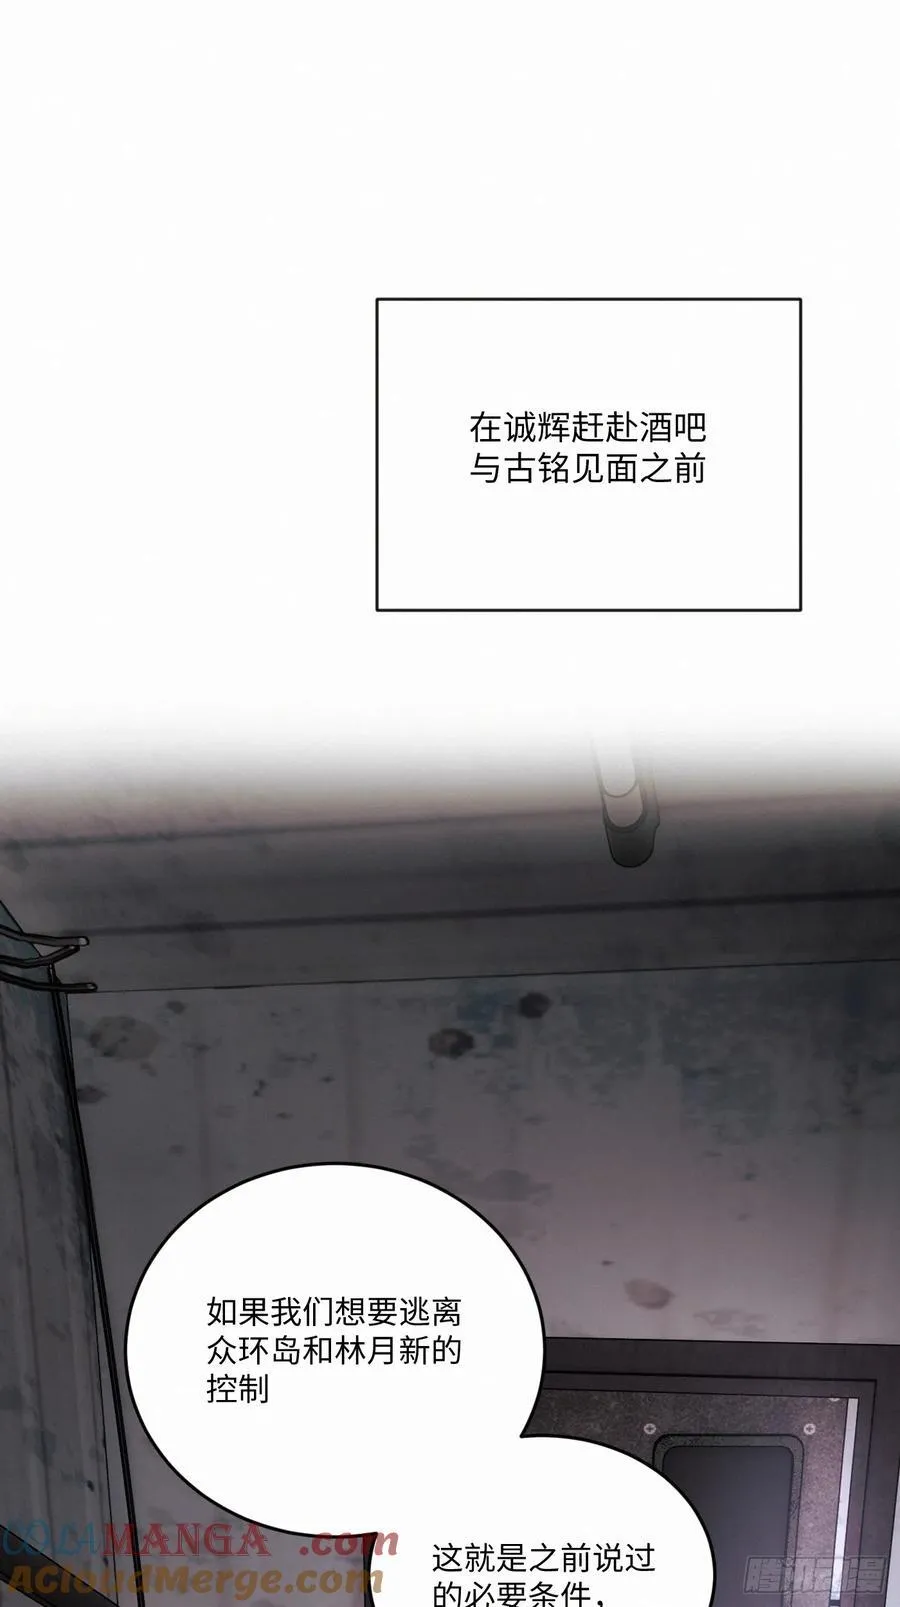 3 chapter · 107